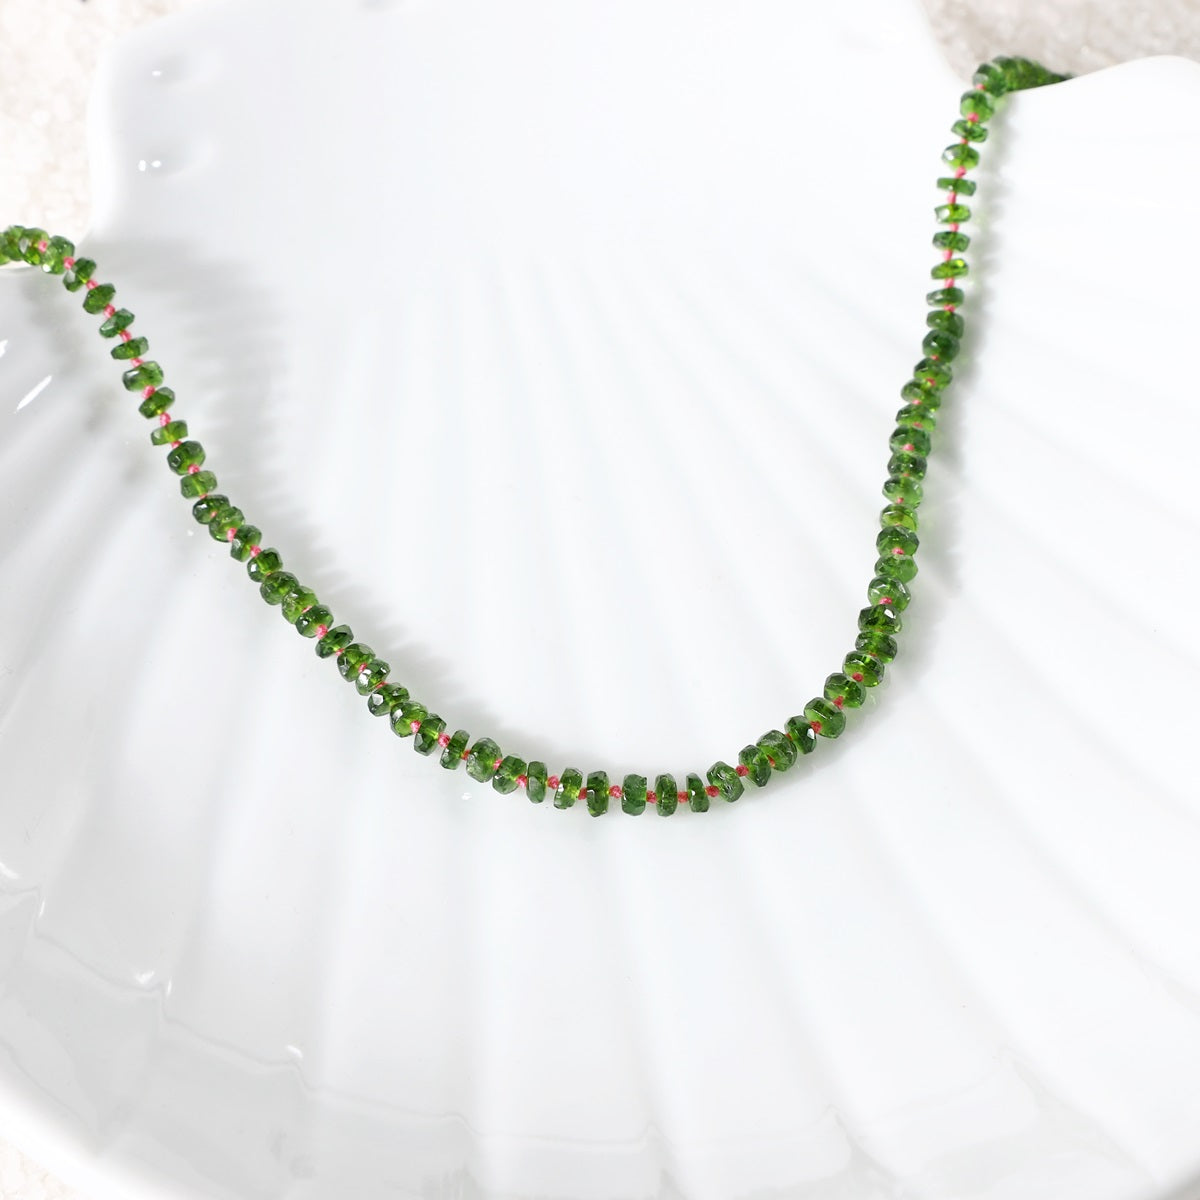 Threaded Chrome Diopside Gemstone Necklace for timeless beauty